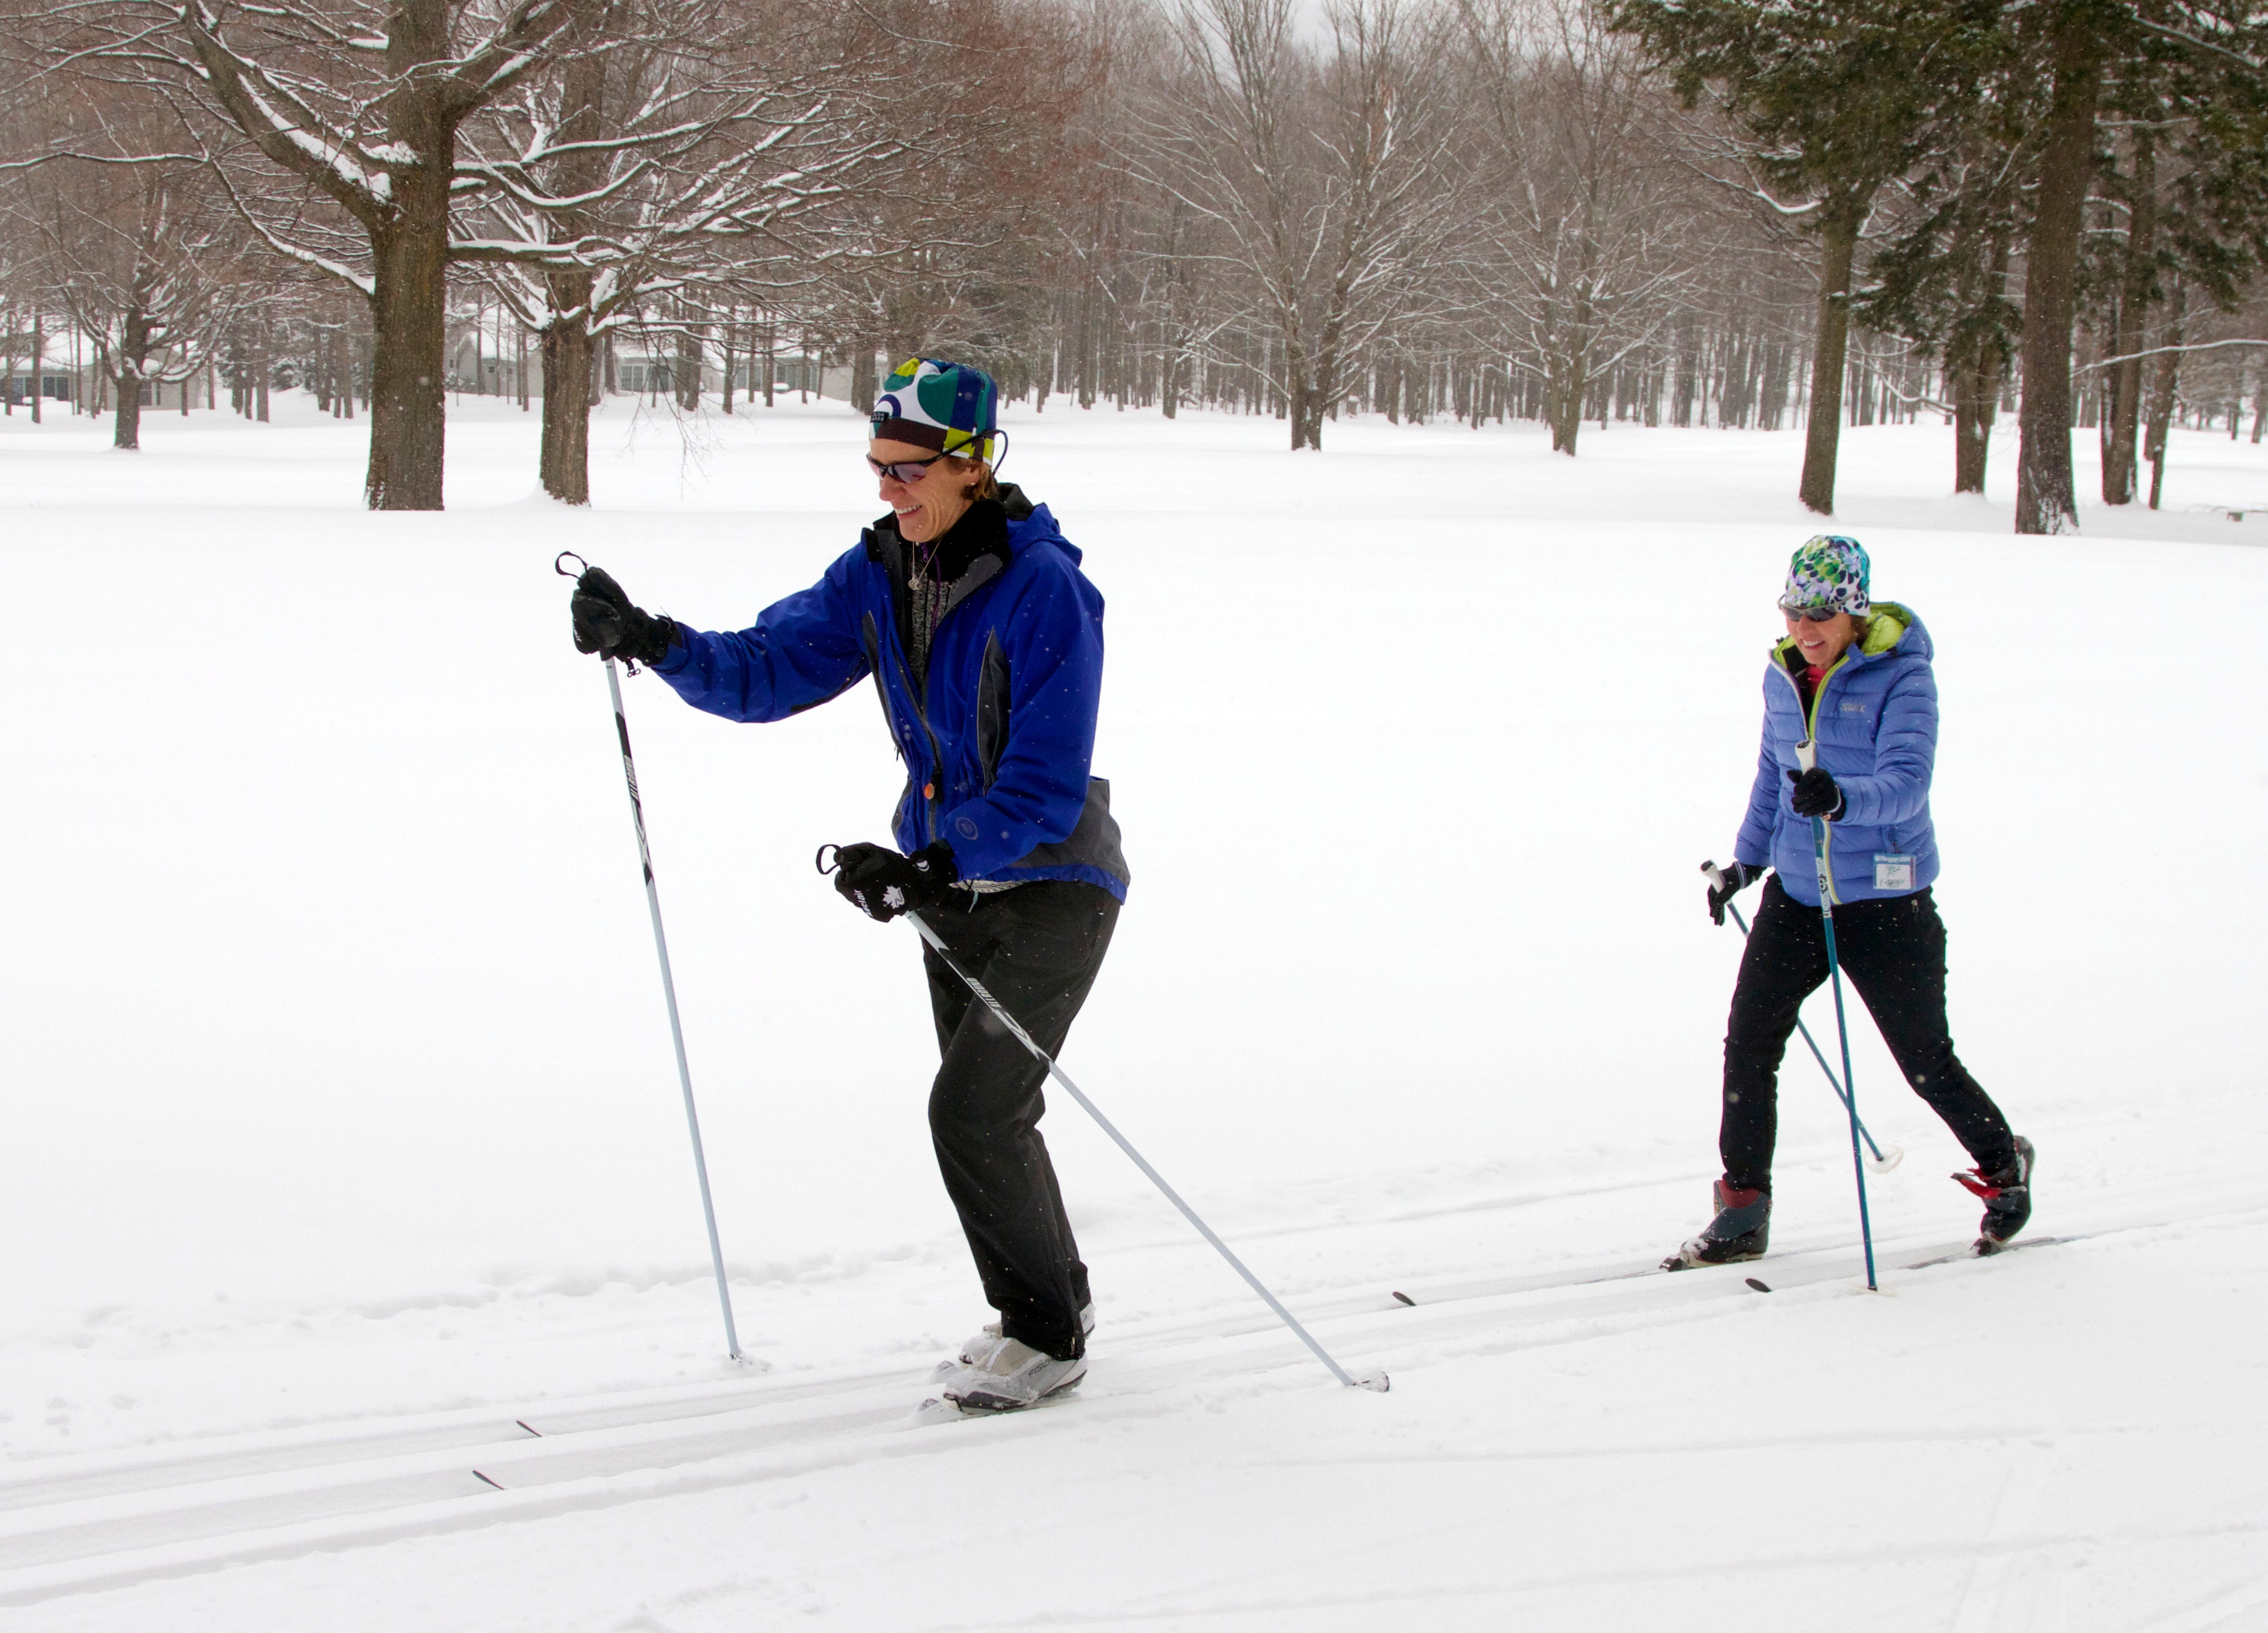 Cross Country Skiing Equipment For Sale In VT Online